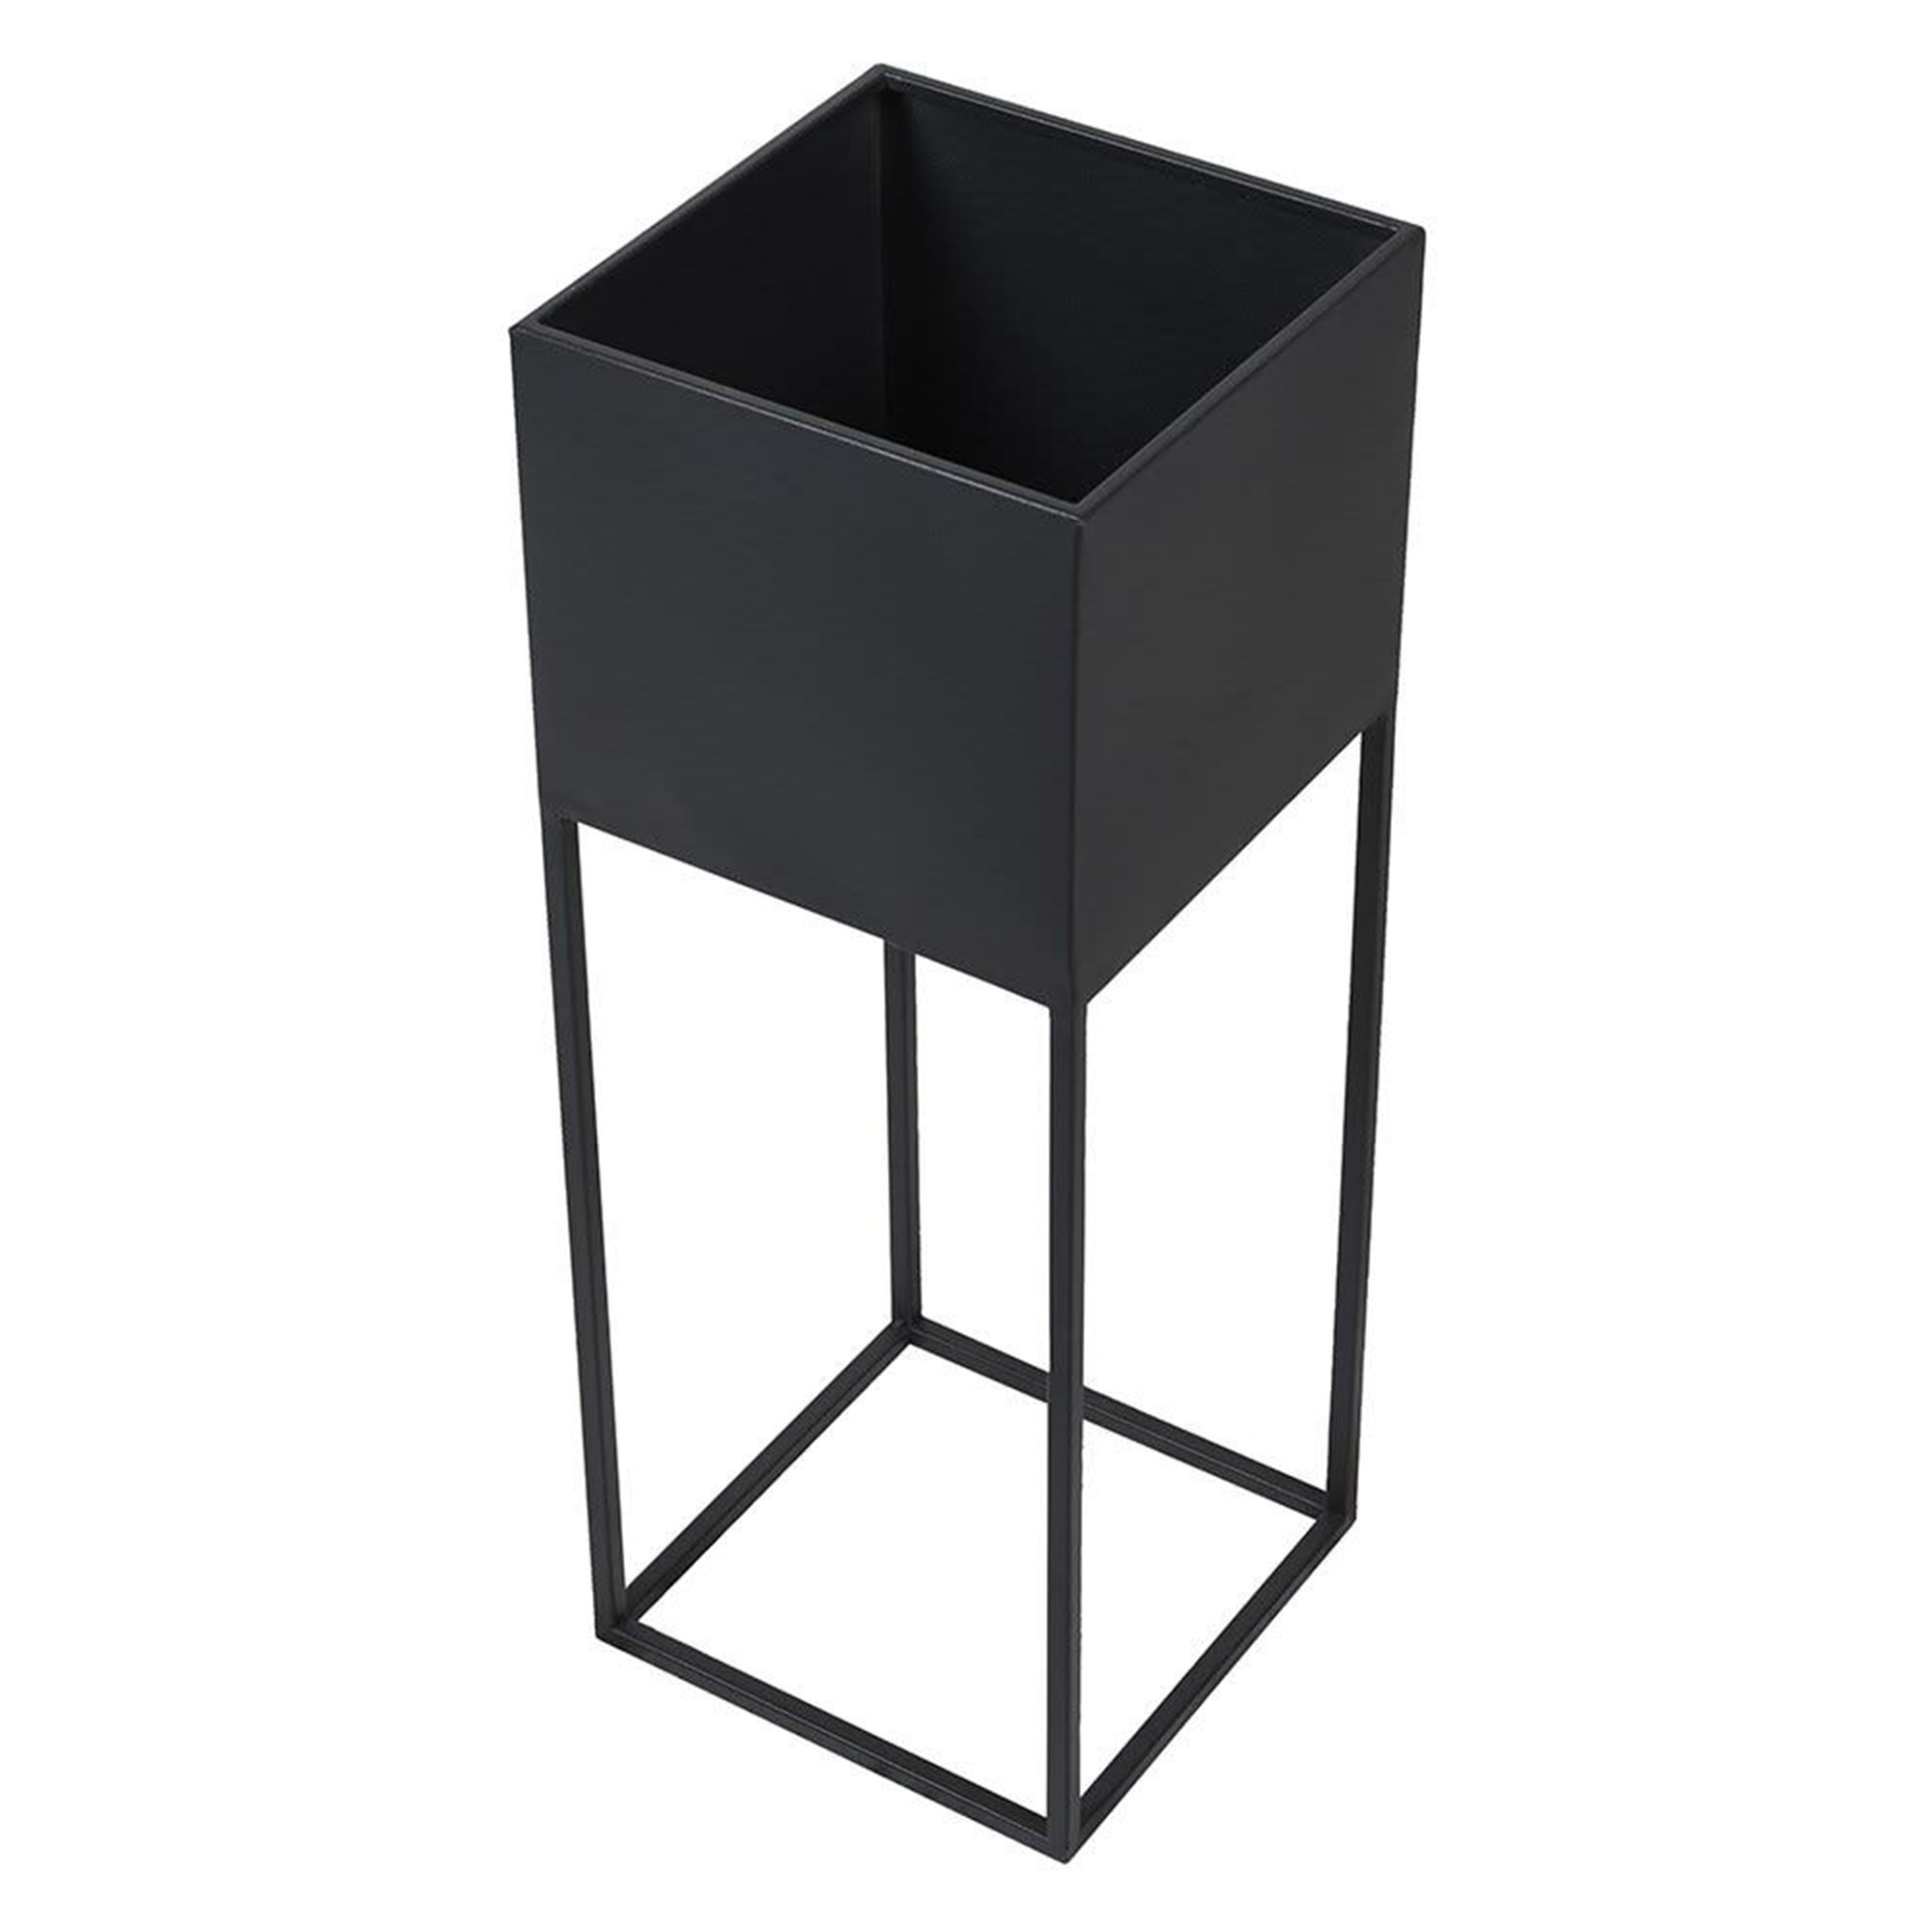 Box Planters on Black Stand - Set of 2